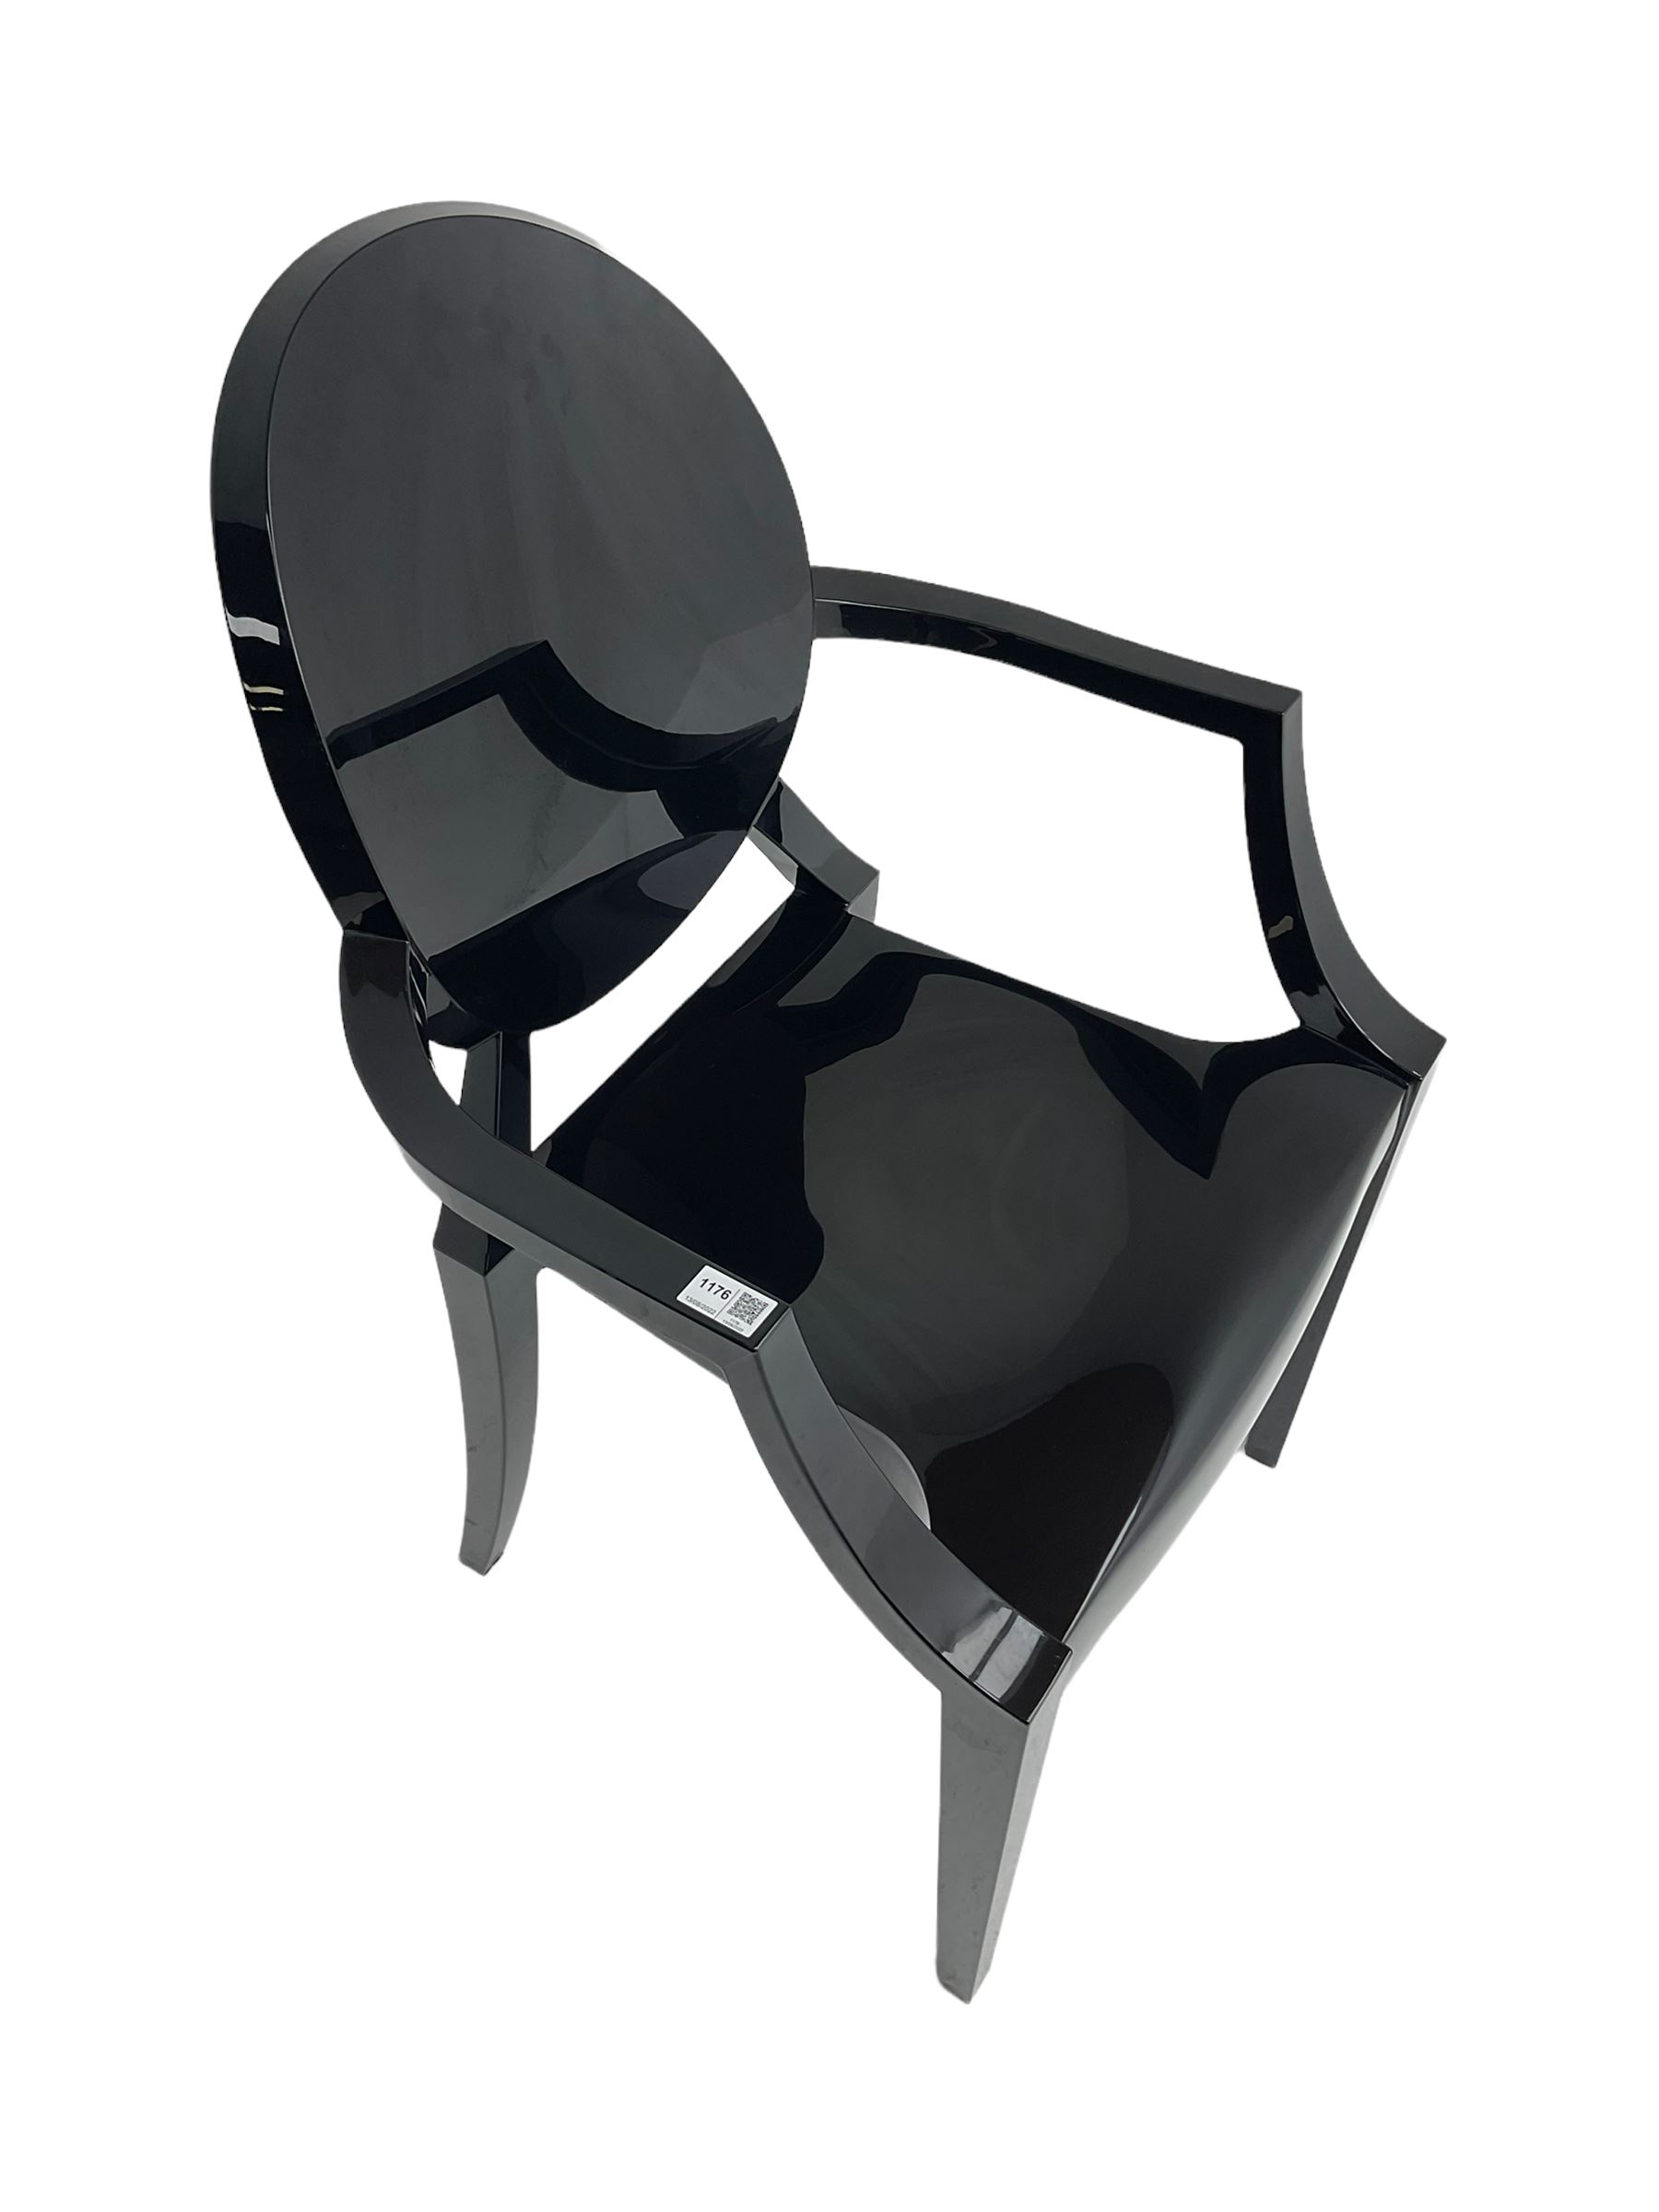 Philippe Starck for Kartell - 'Louis Ghost' chair - Image 4 of 6